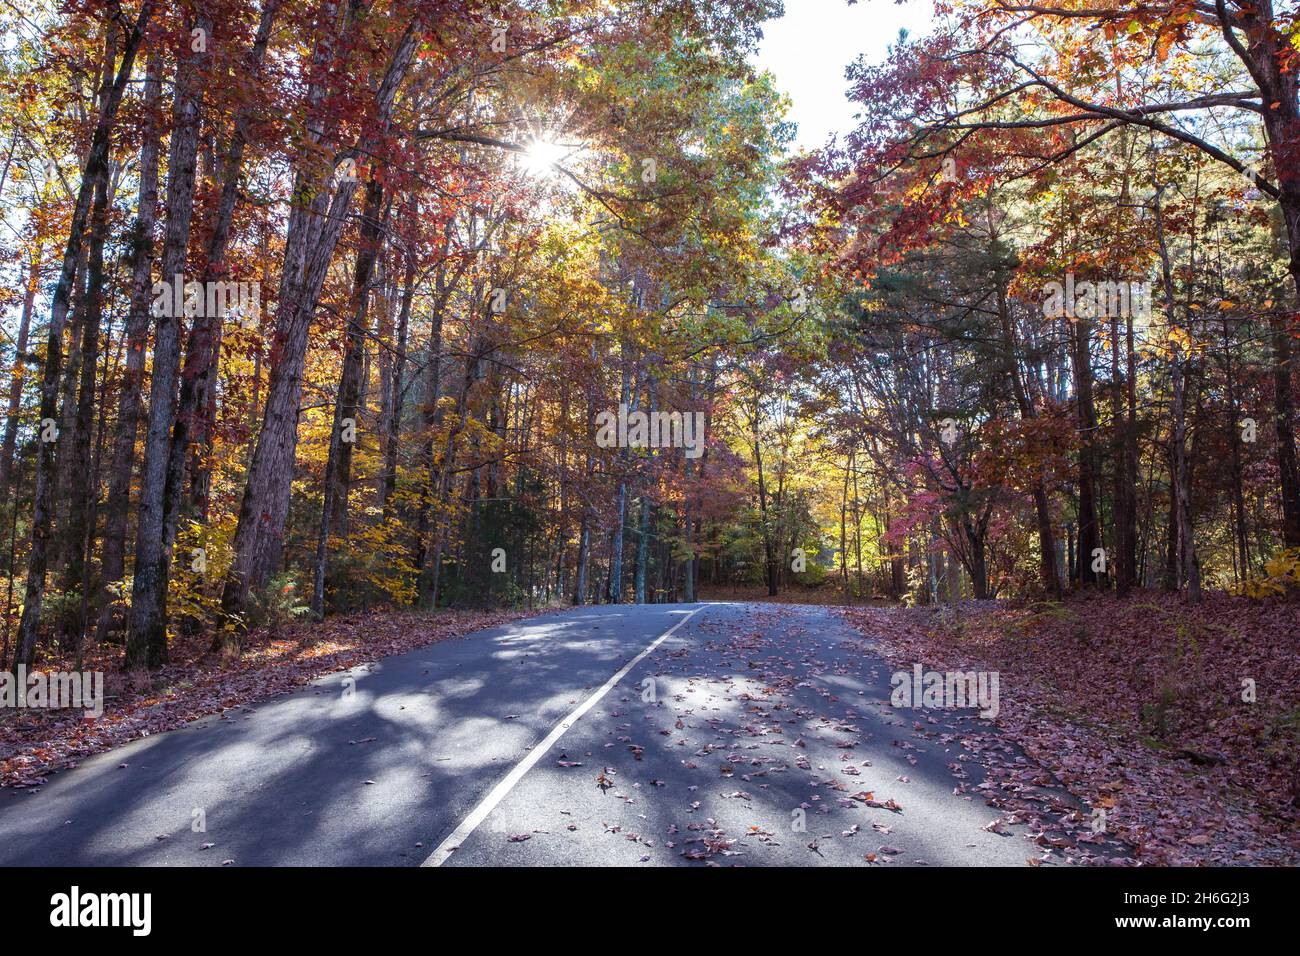 The late afternoon sun shines through colorful fall leaves on a rural country road. Stock Photo